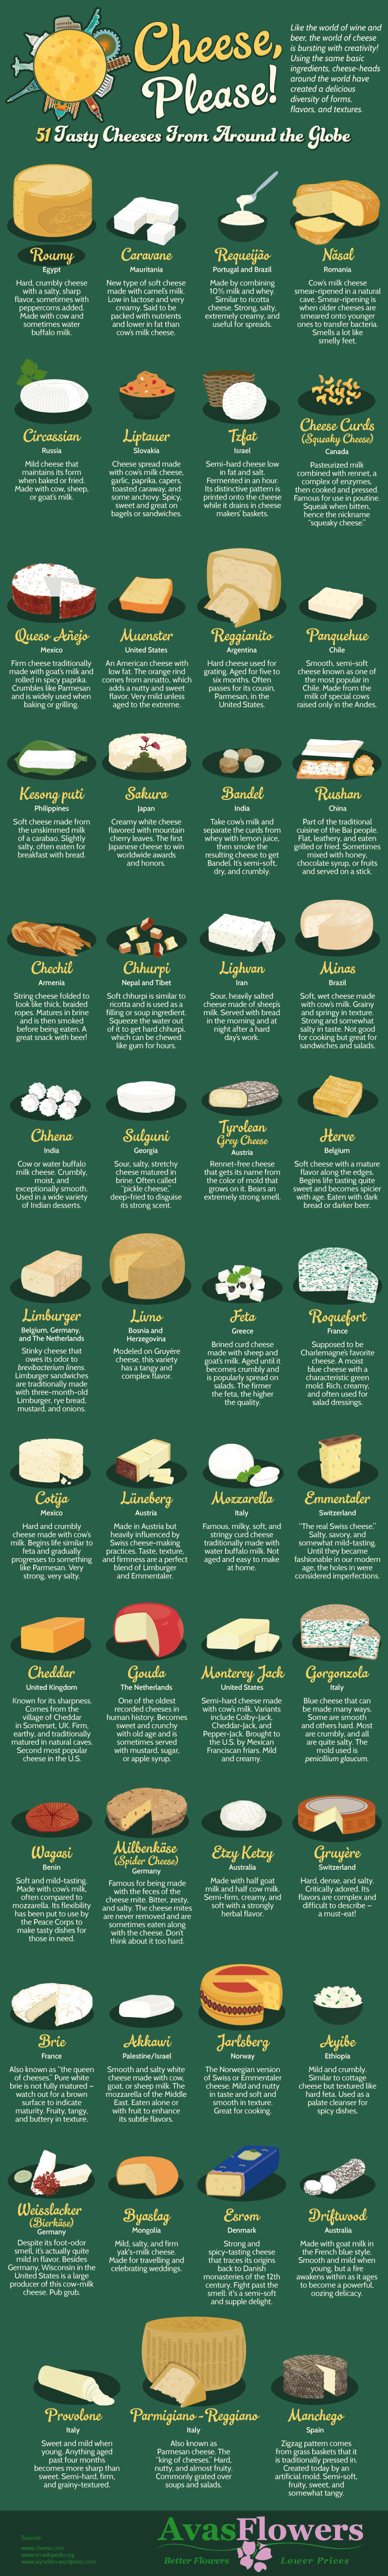 Get To Know Some International Cheeses!